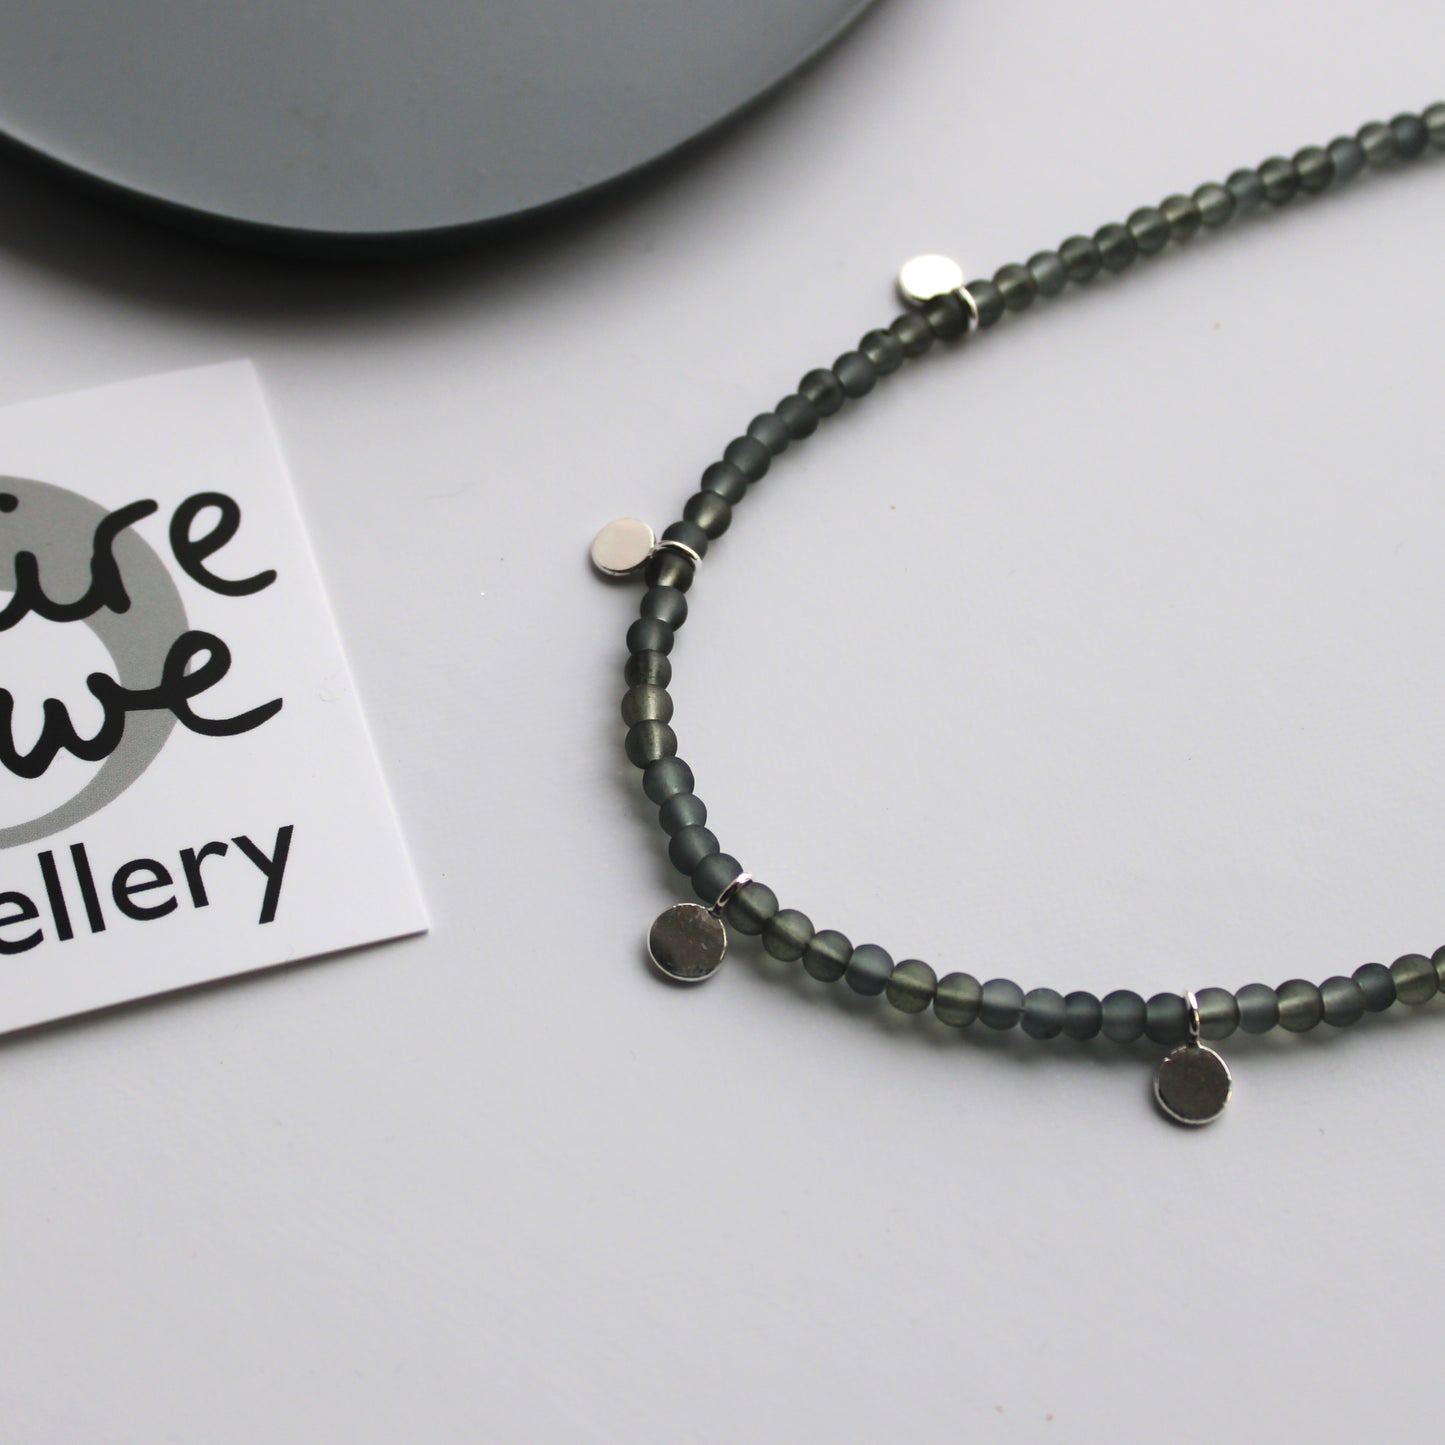 Grey Glass Bead & 5 Silver Pebble Necklace